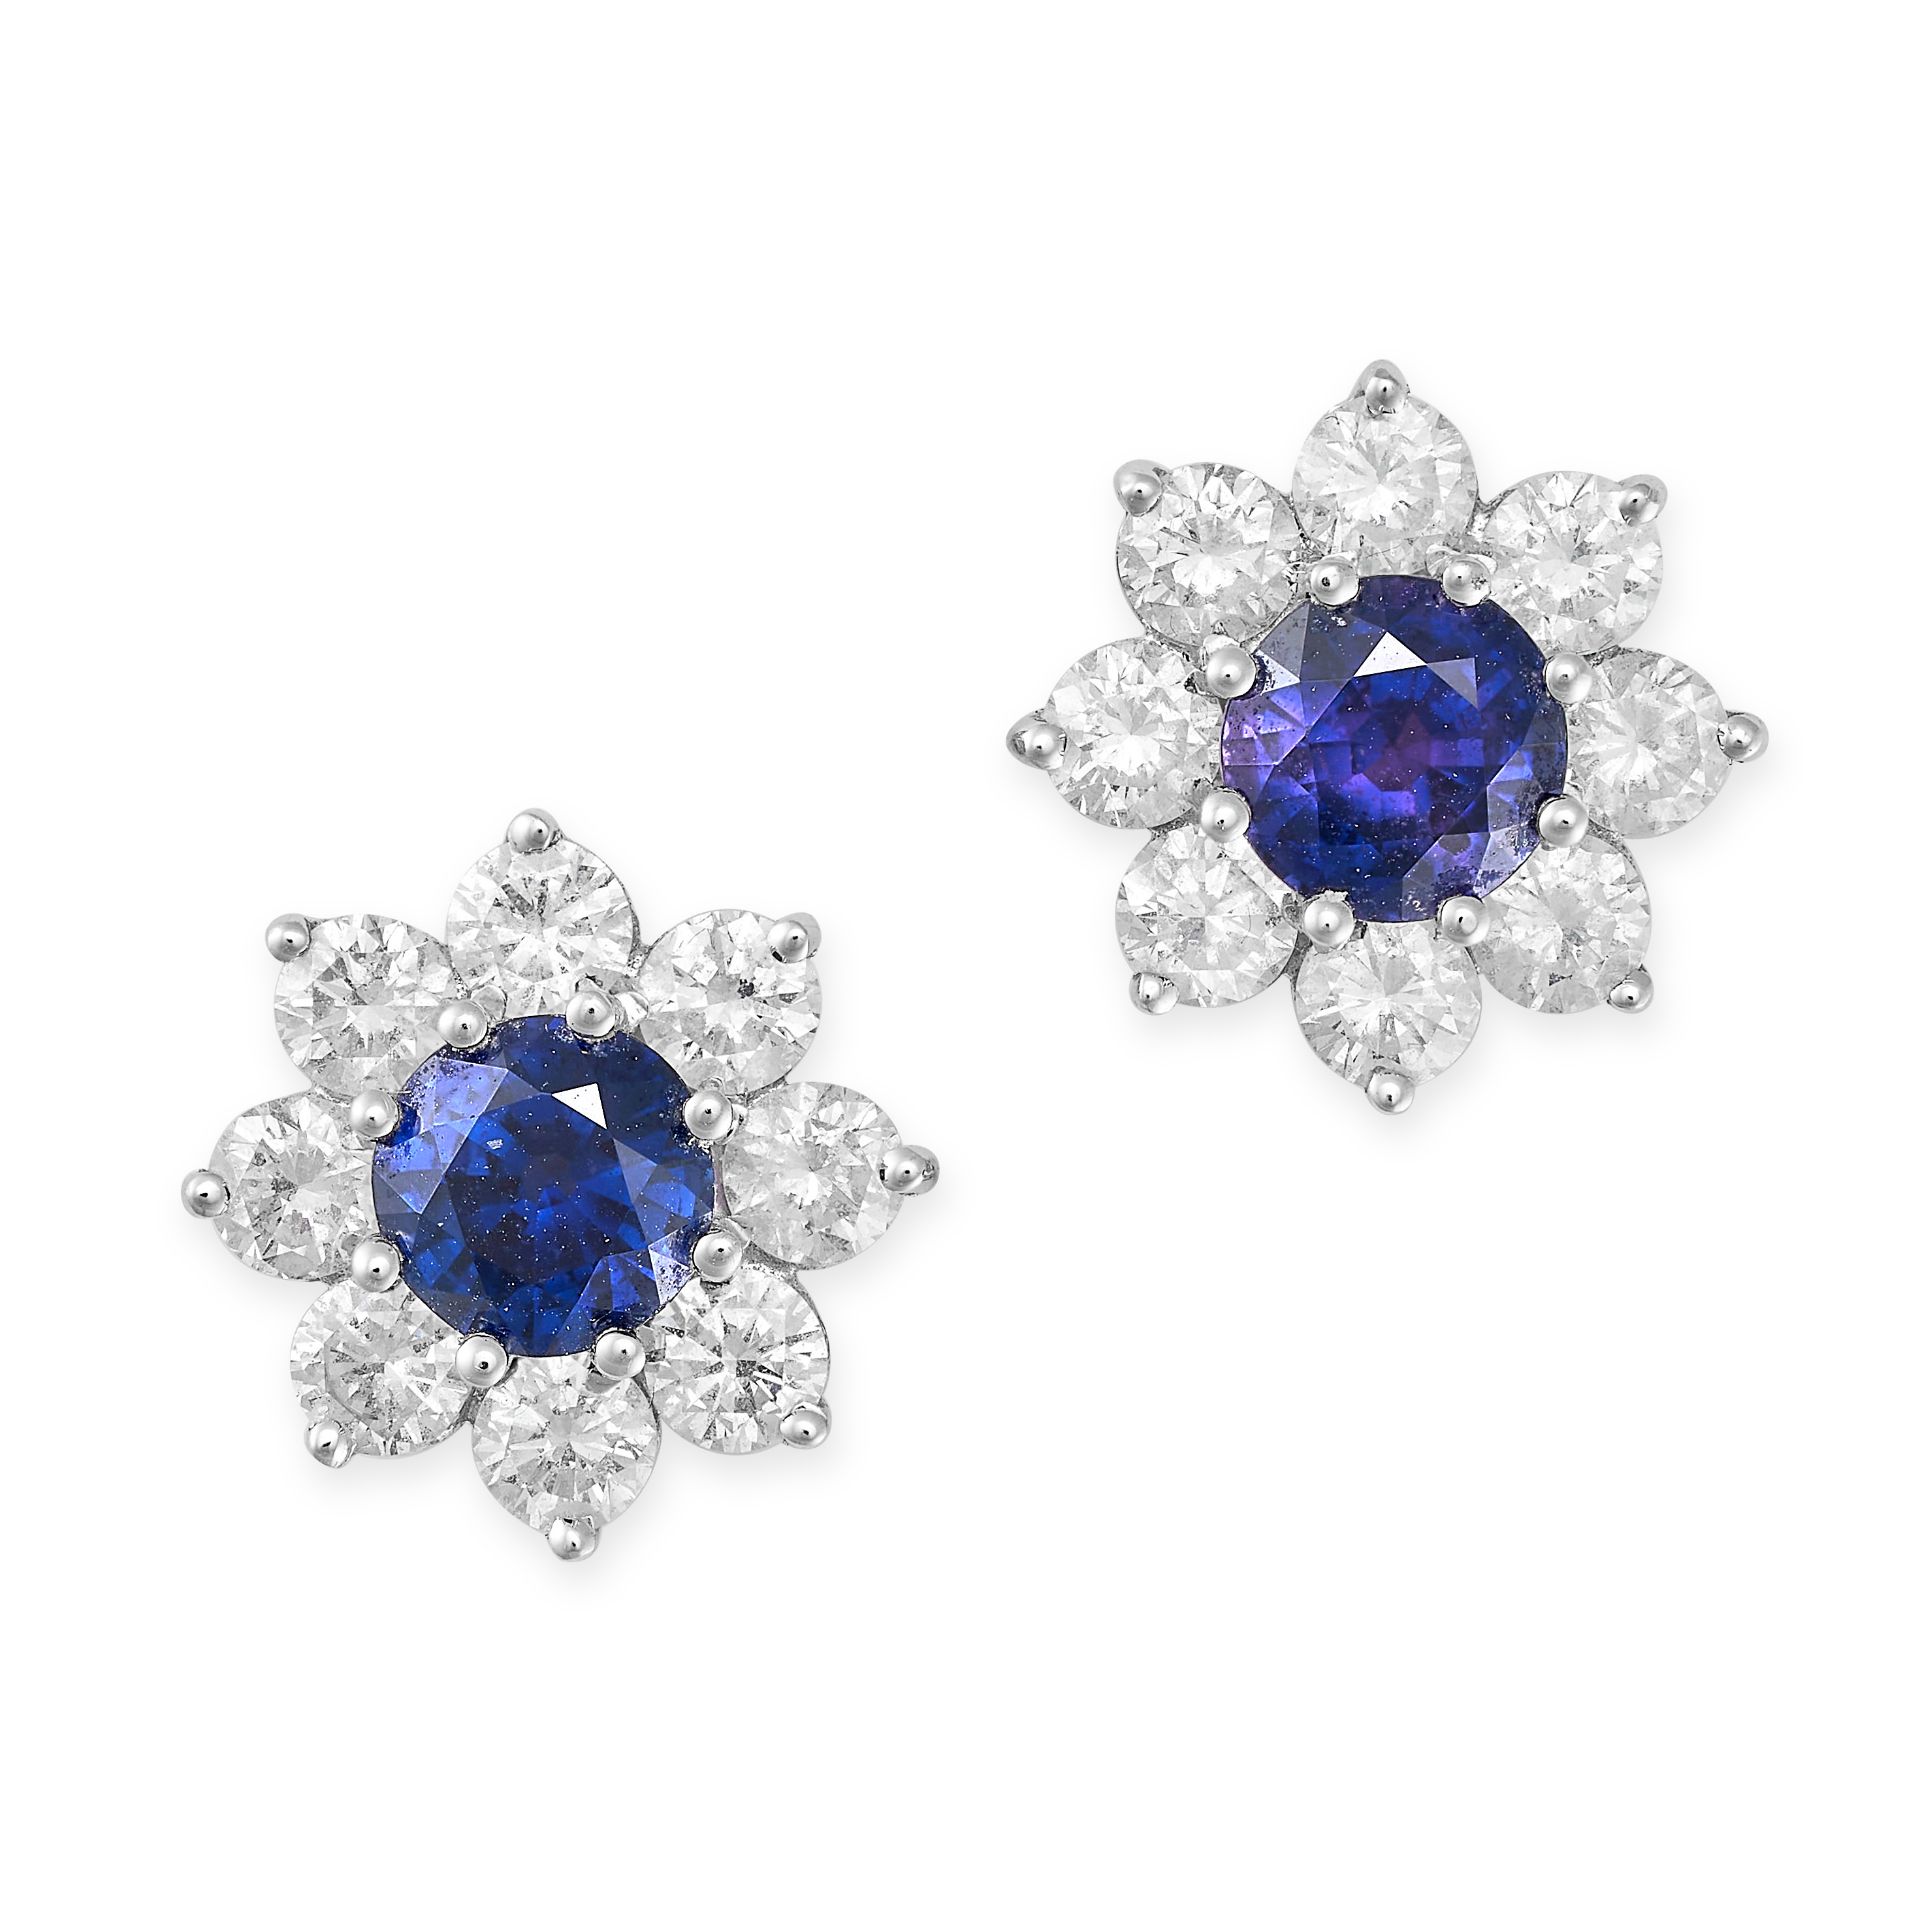 A PAIR OF SAPPHIRE AND DIAMOND CLUSTER EARRINGS in 18ct white gold, each set with a round cut